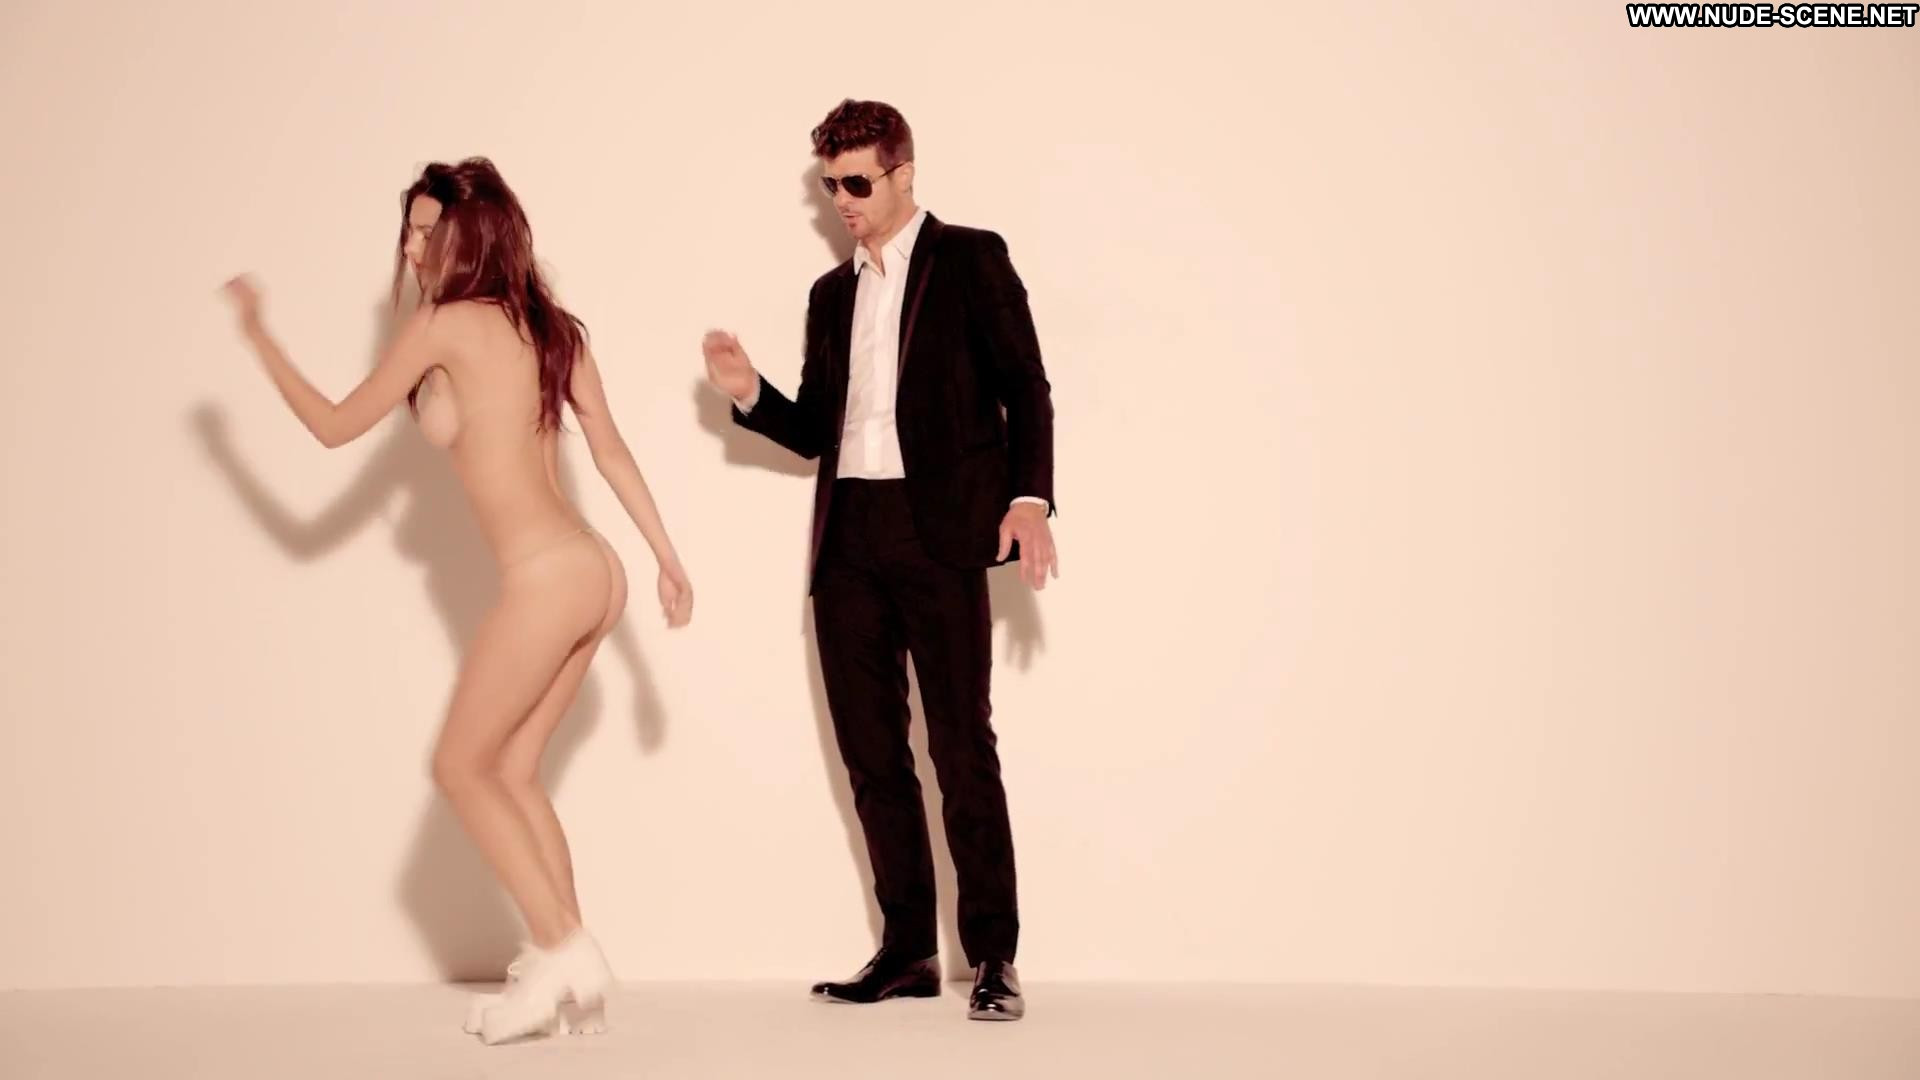 Robin thicke blurred lines nude